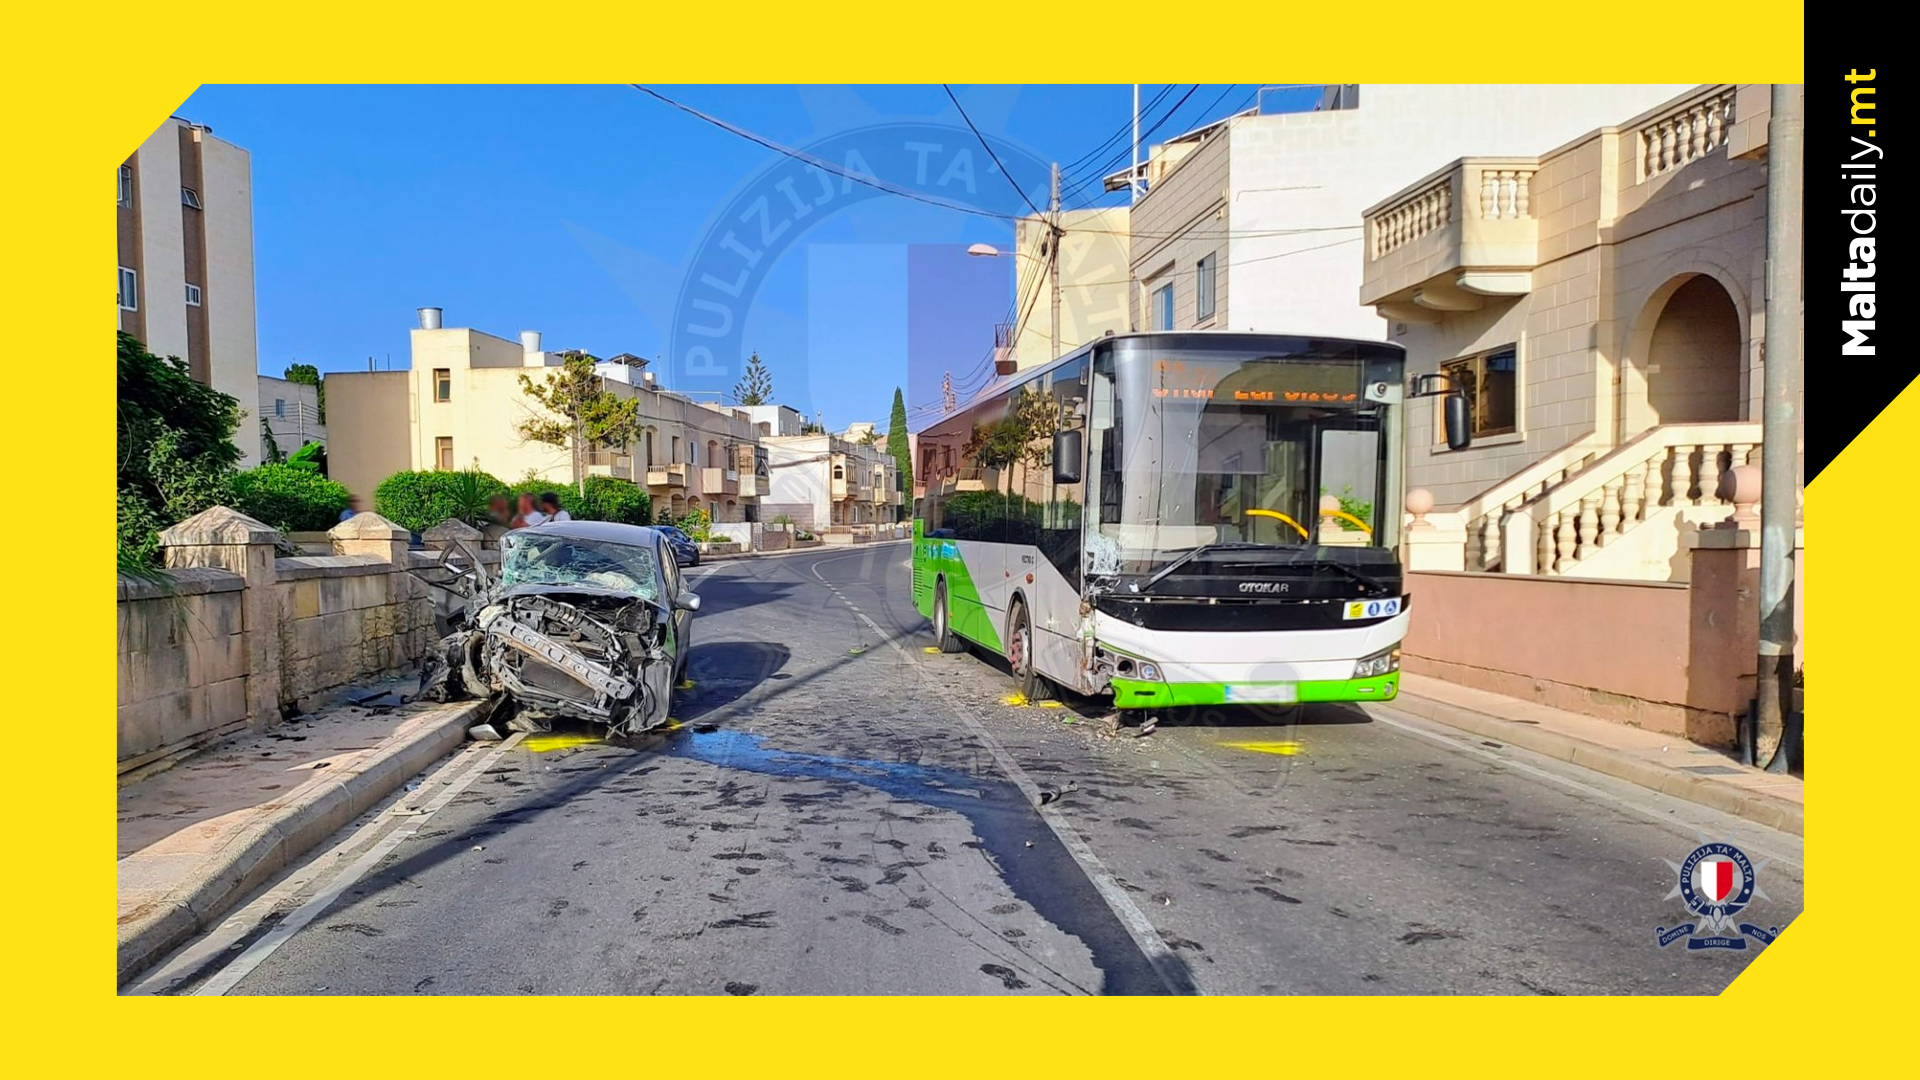 22 Year Old Driver Injured After Crash With Bus In Rabat